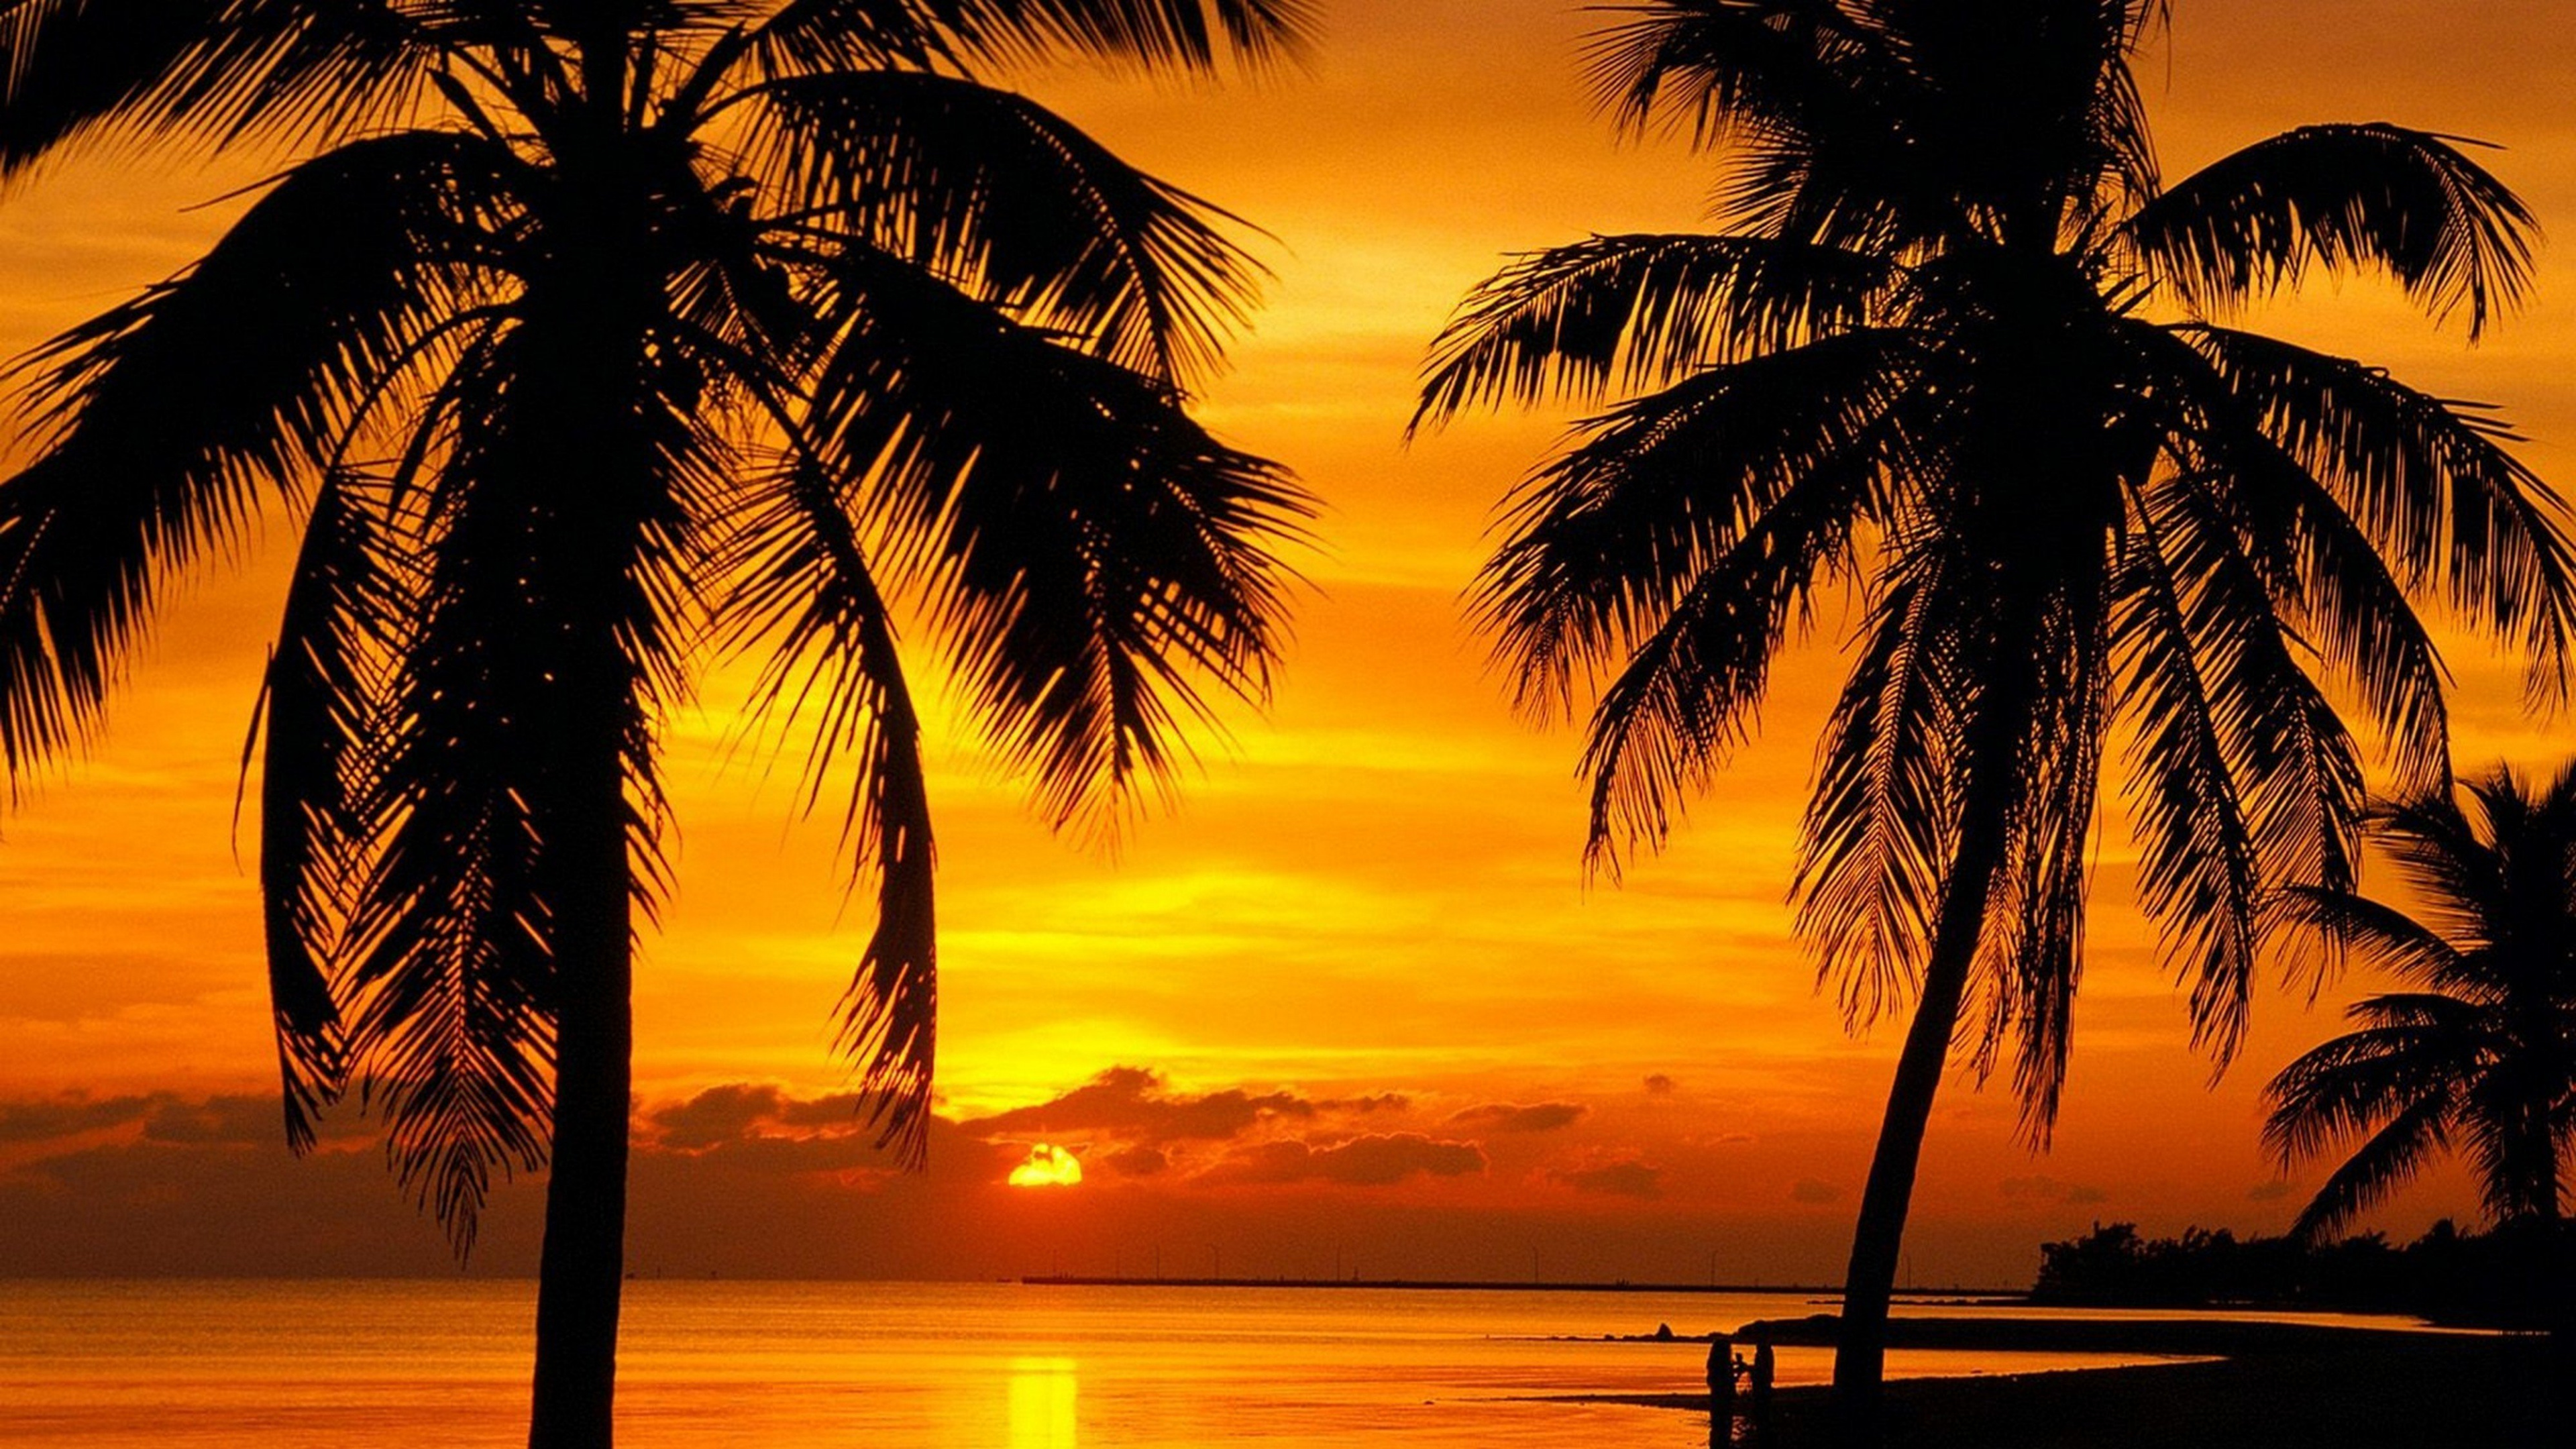 Silhouette of Palm Tree Near Body of Water During Sunset. Wallpaper in 3840x2160 Resolution